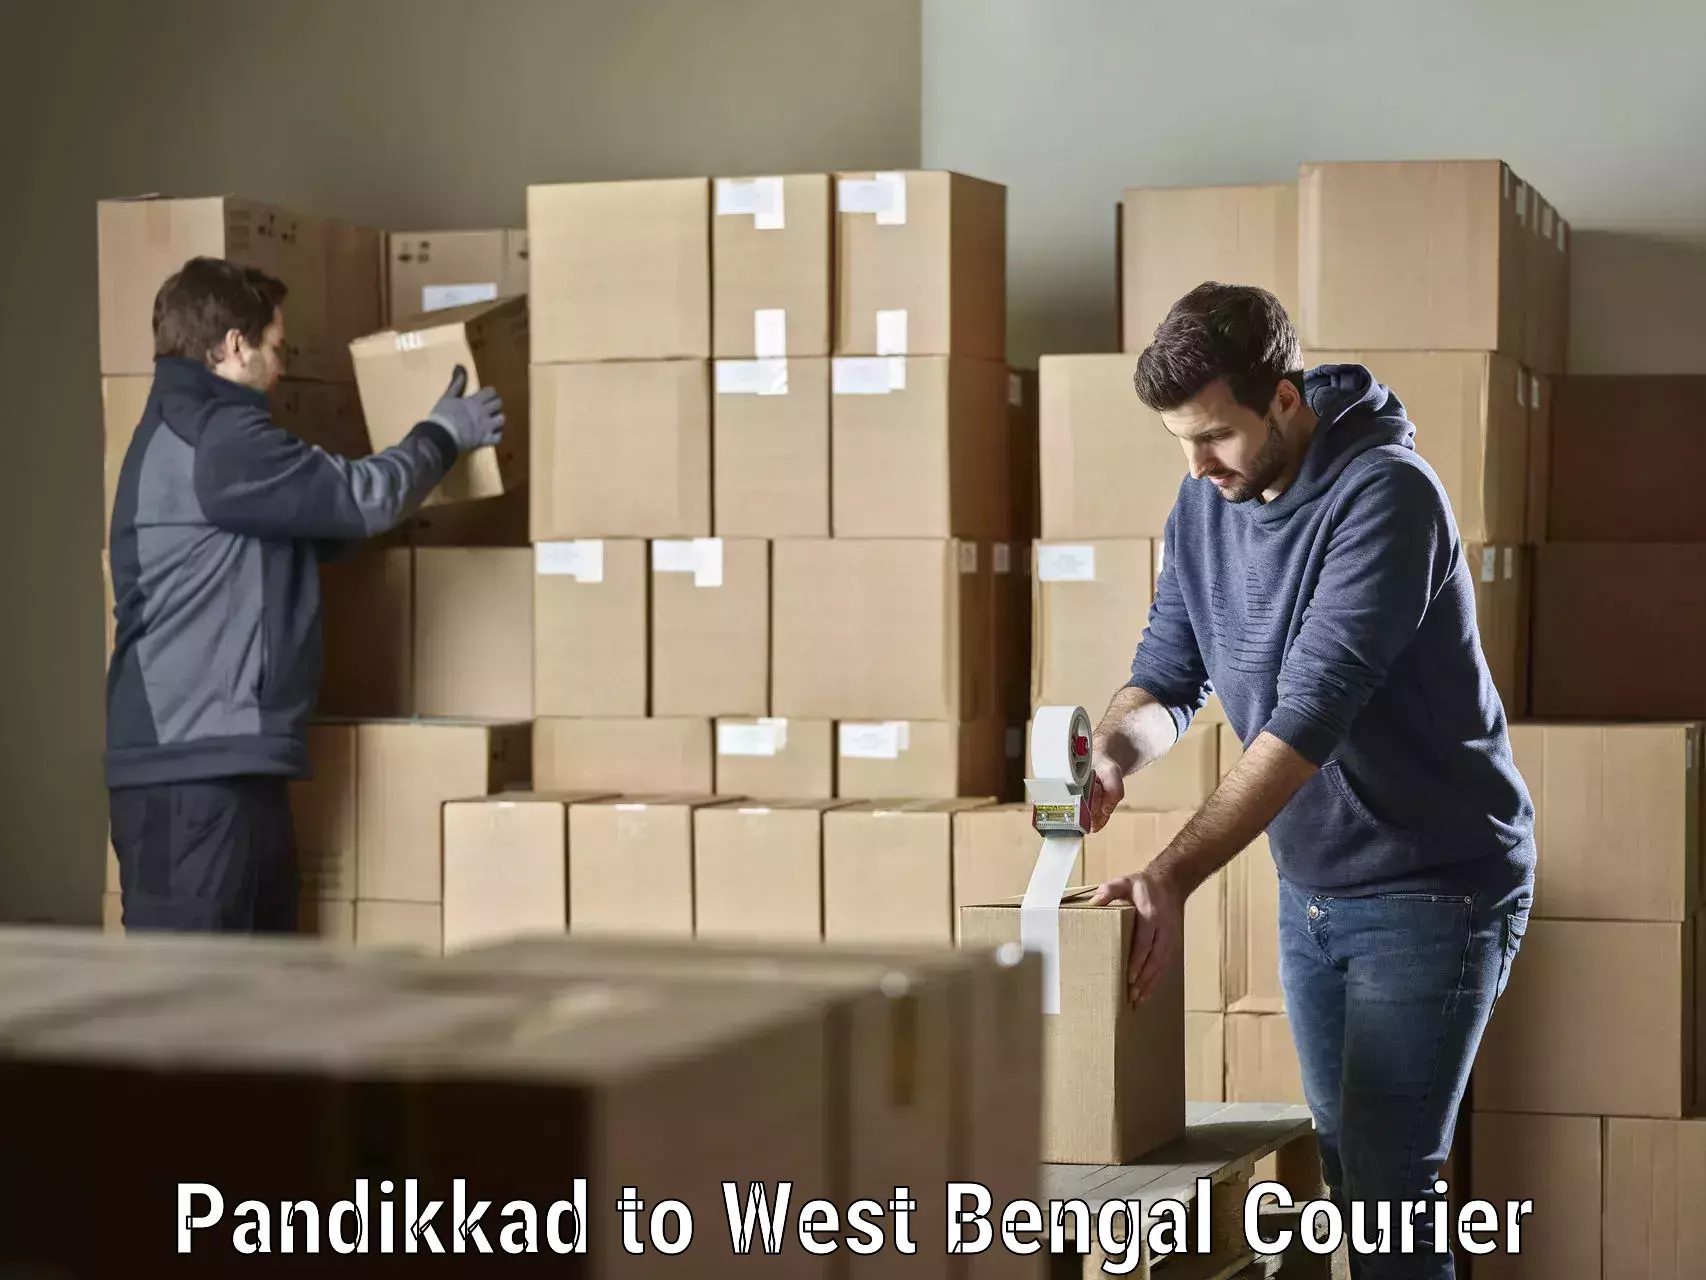 Delivery service partnership Pandikkad to West Bengal